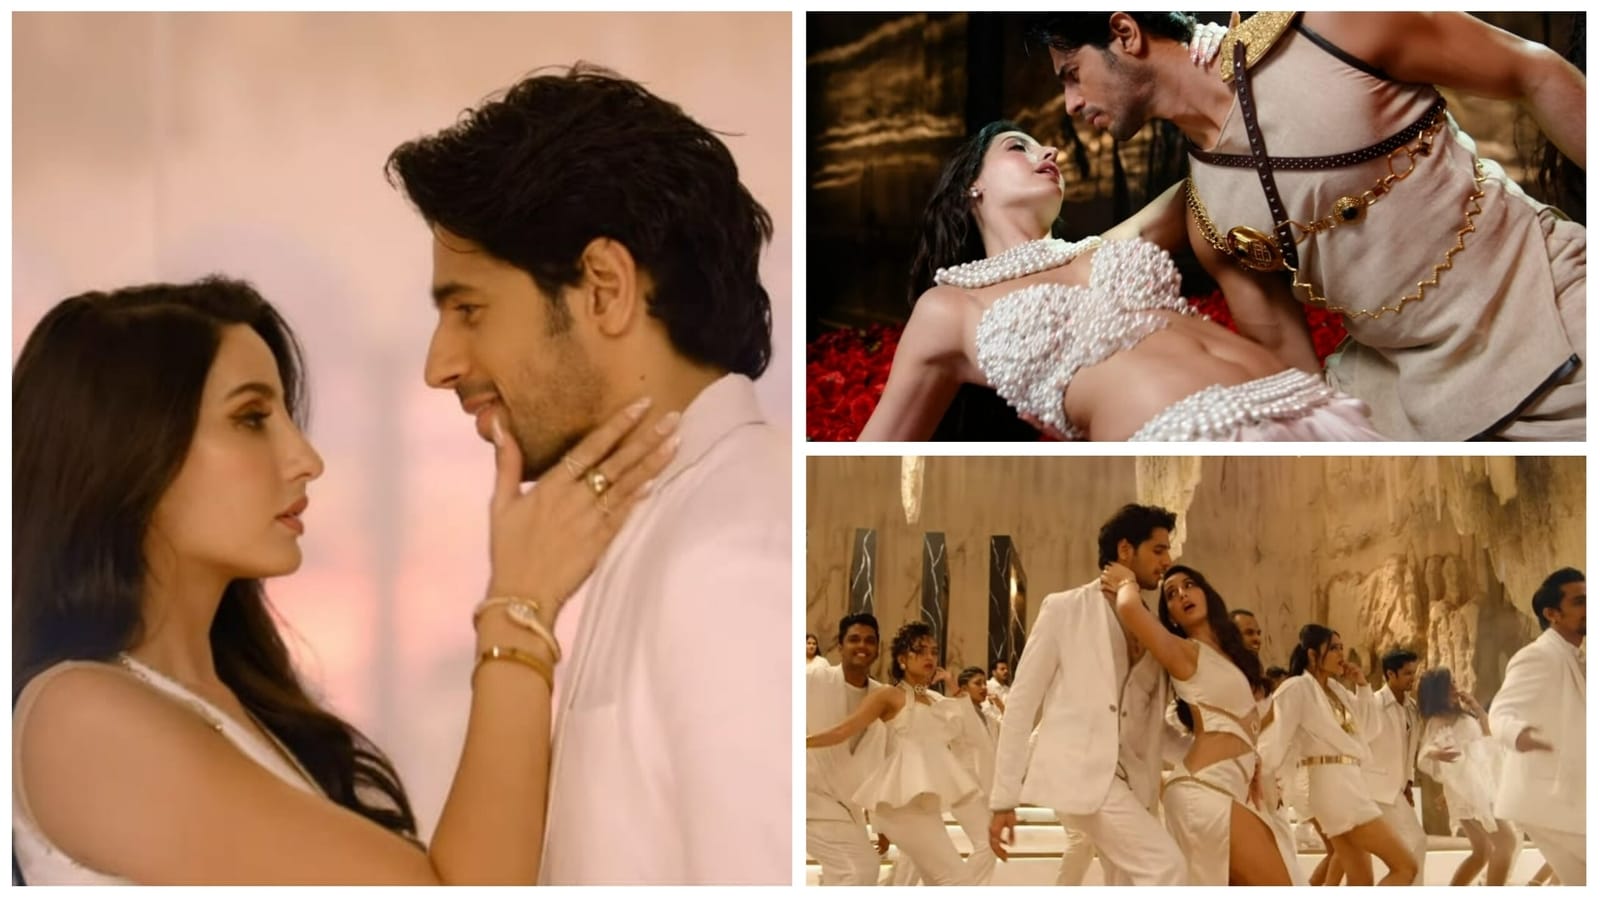 Nora Fatehi and Sidharth Malhotra dance sensuously in Manike from 'Thank God'